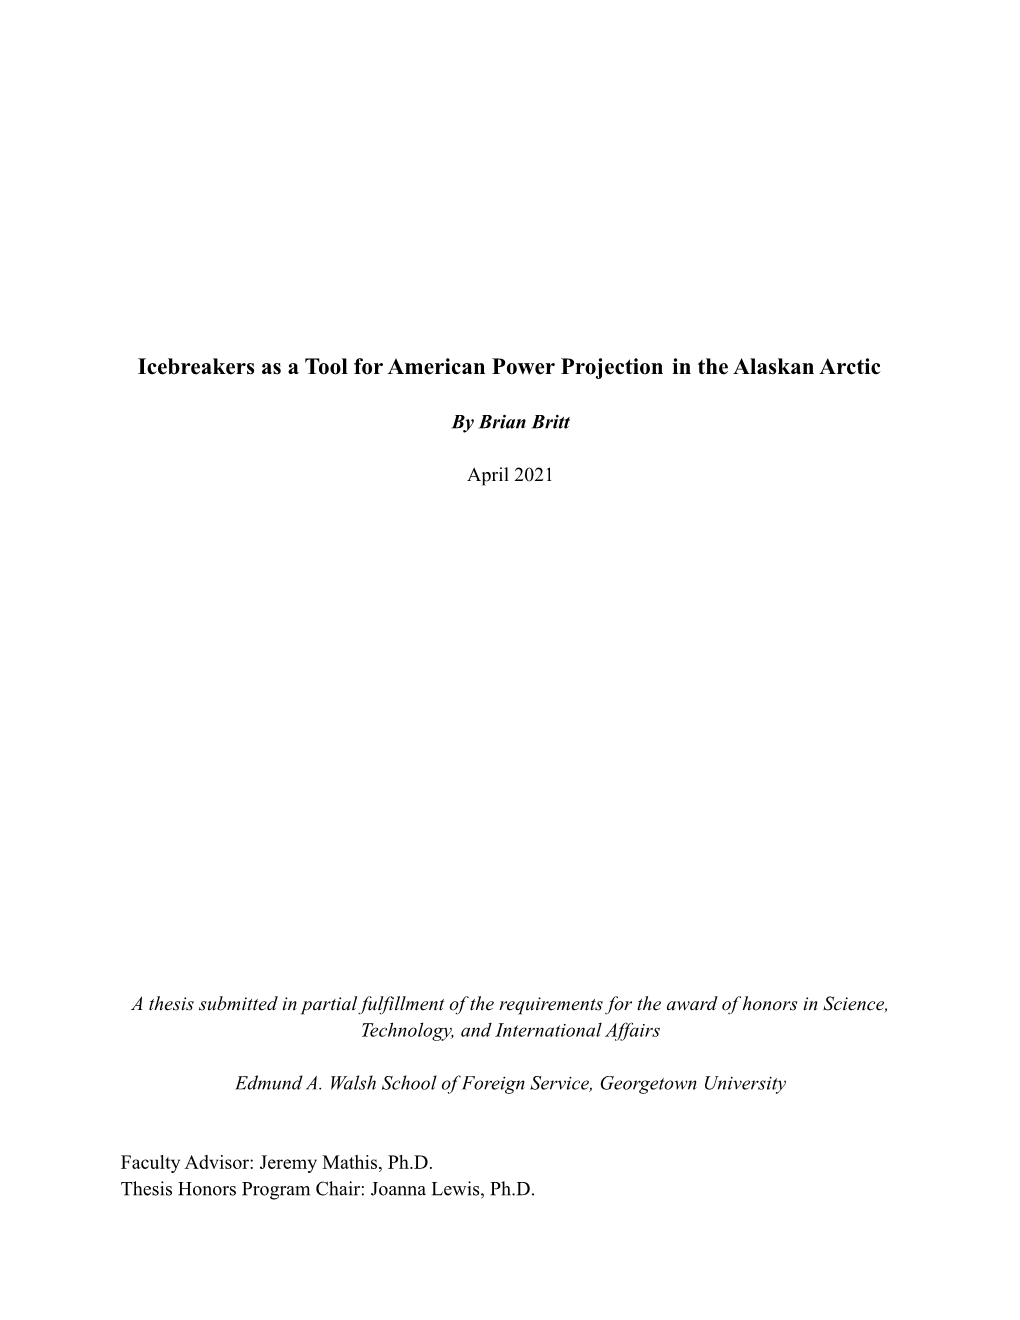 Copy of Senior Honor's Thesis